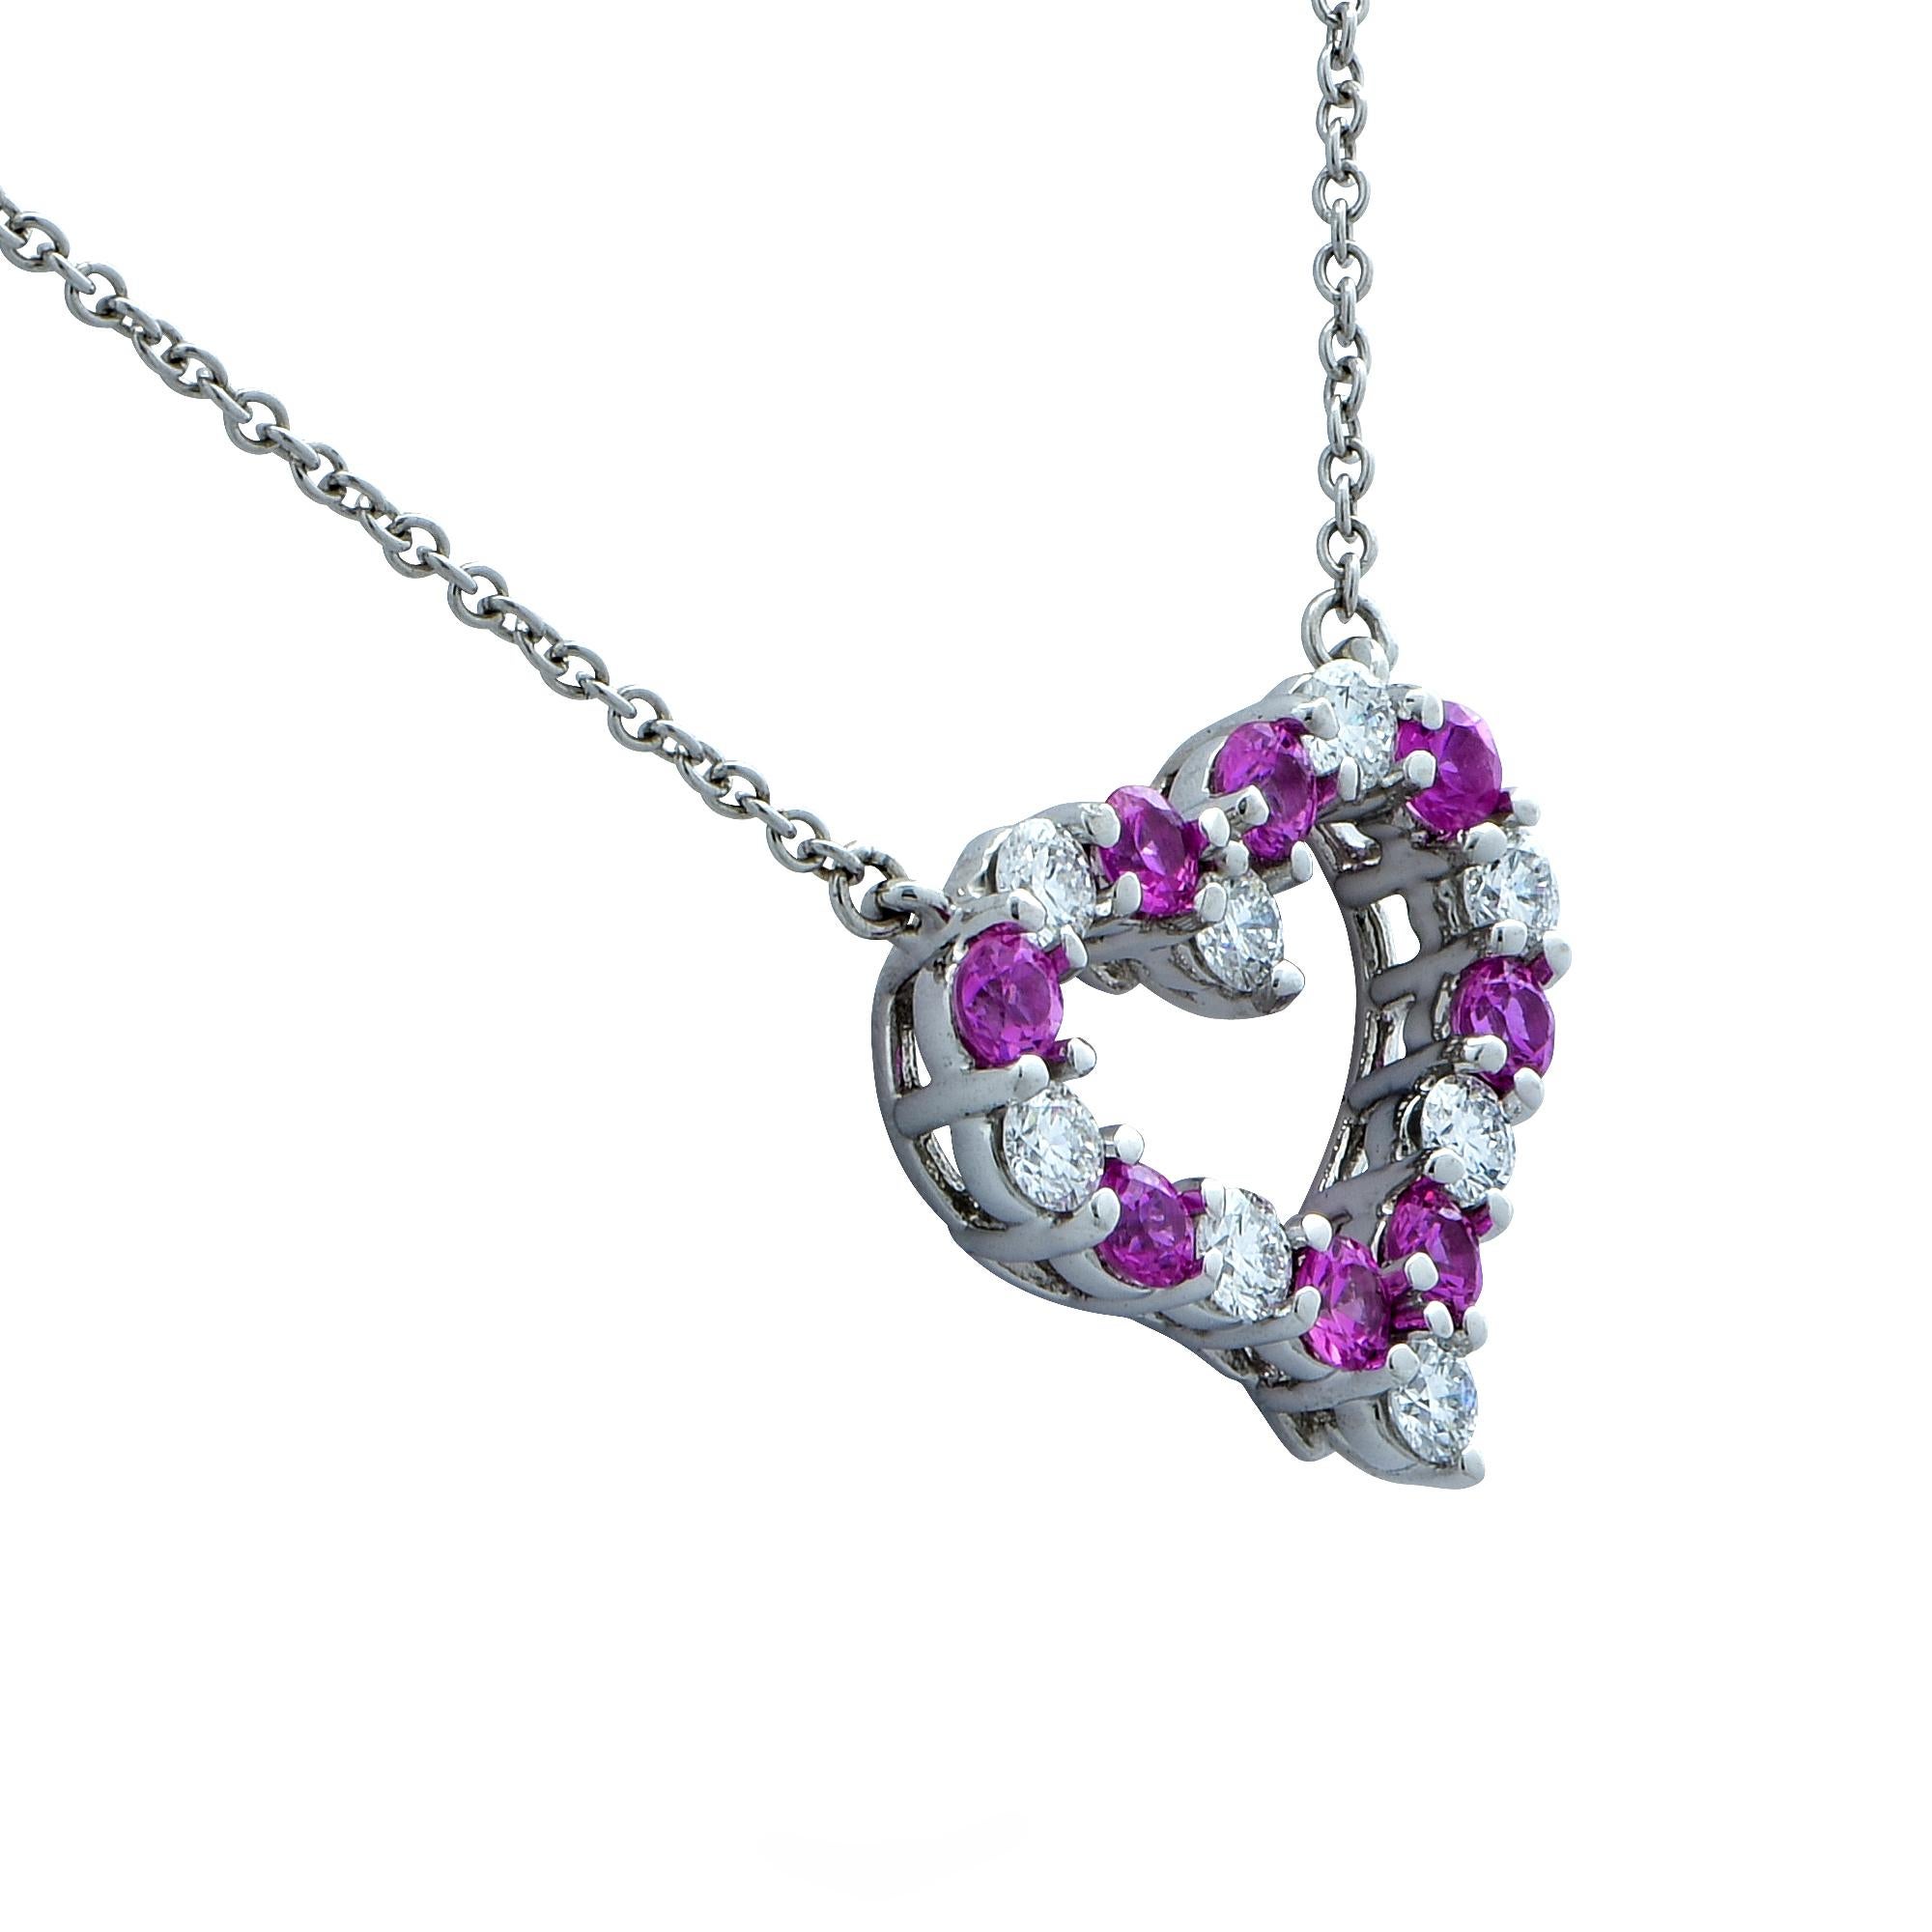 Tiffany & Co. pink sapphire and diamond heart necklace crafted in platinum featuring 8 round brilliant cut diamonds weighing approximately .31cts total, F color, VS clarity accented by 8 pink sapphires weighing approximately .38cts total. The